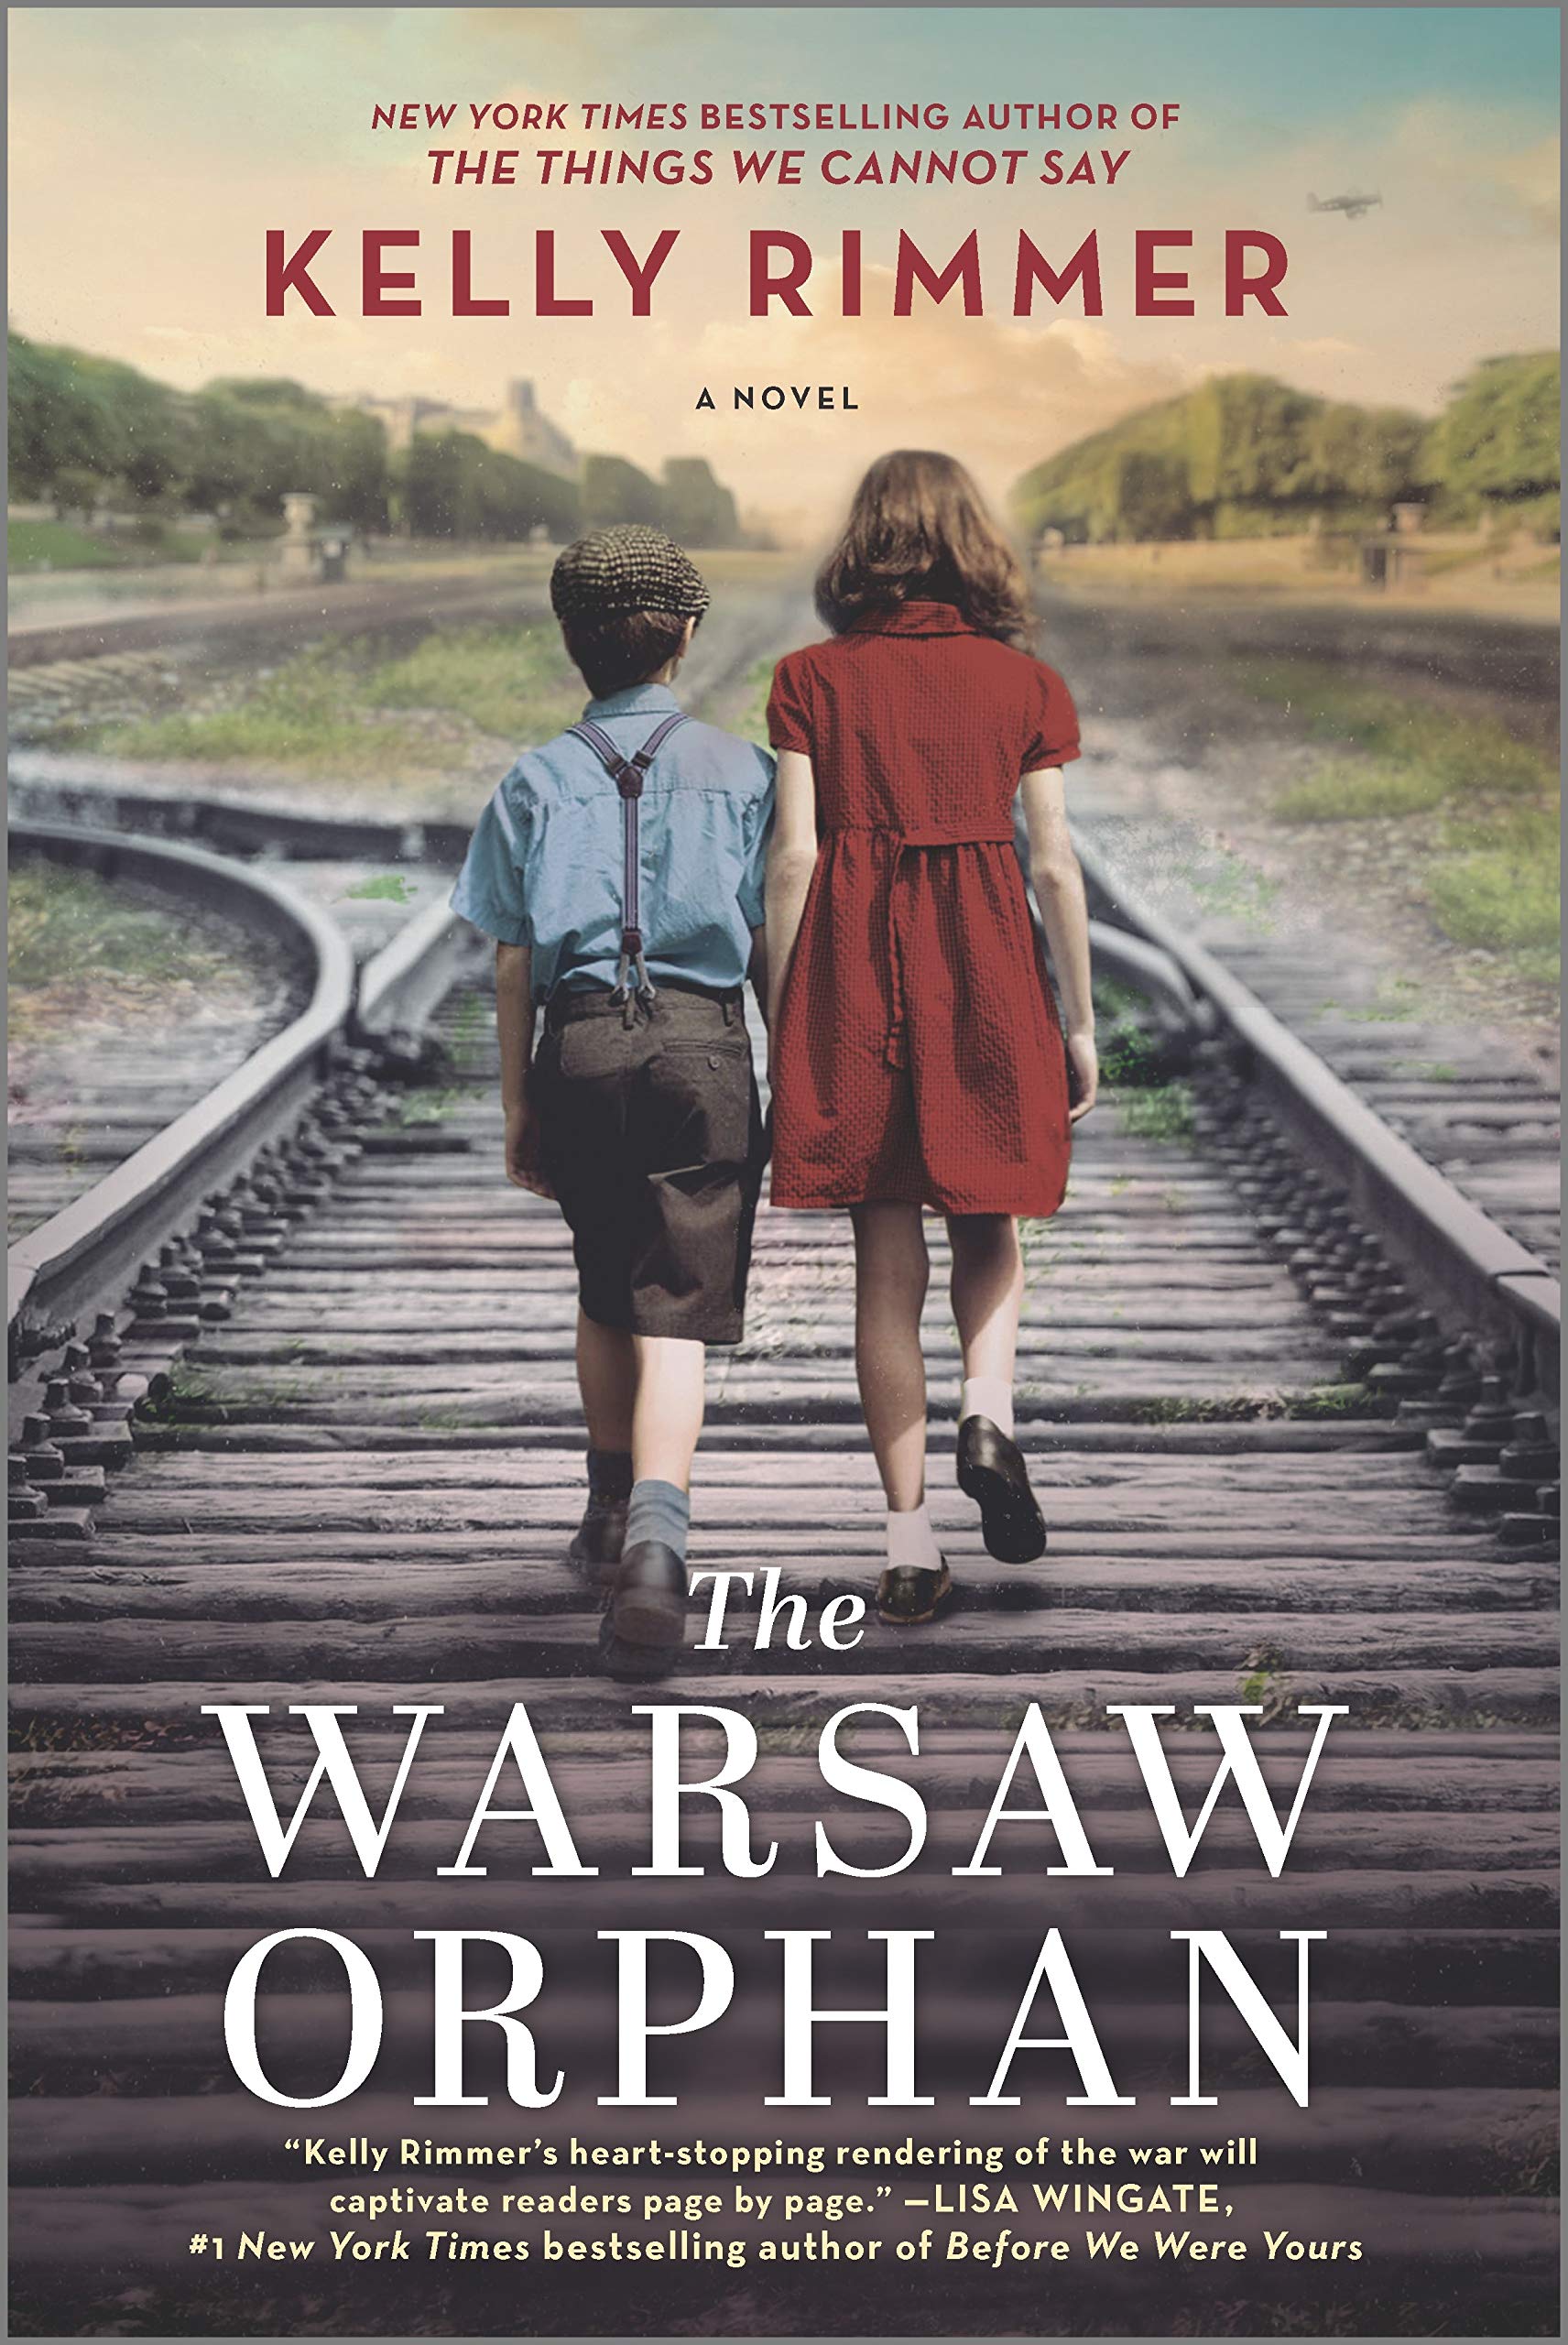 Image for "The Warsaw Orphan"